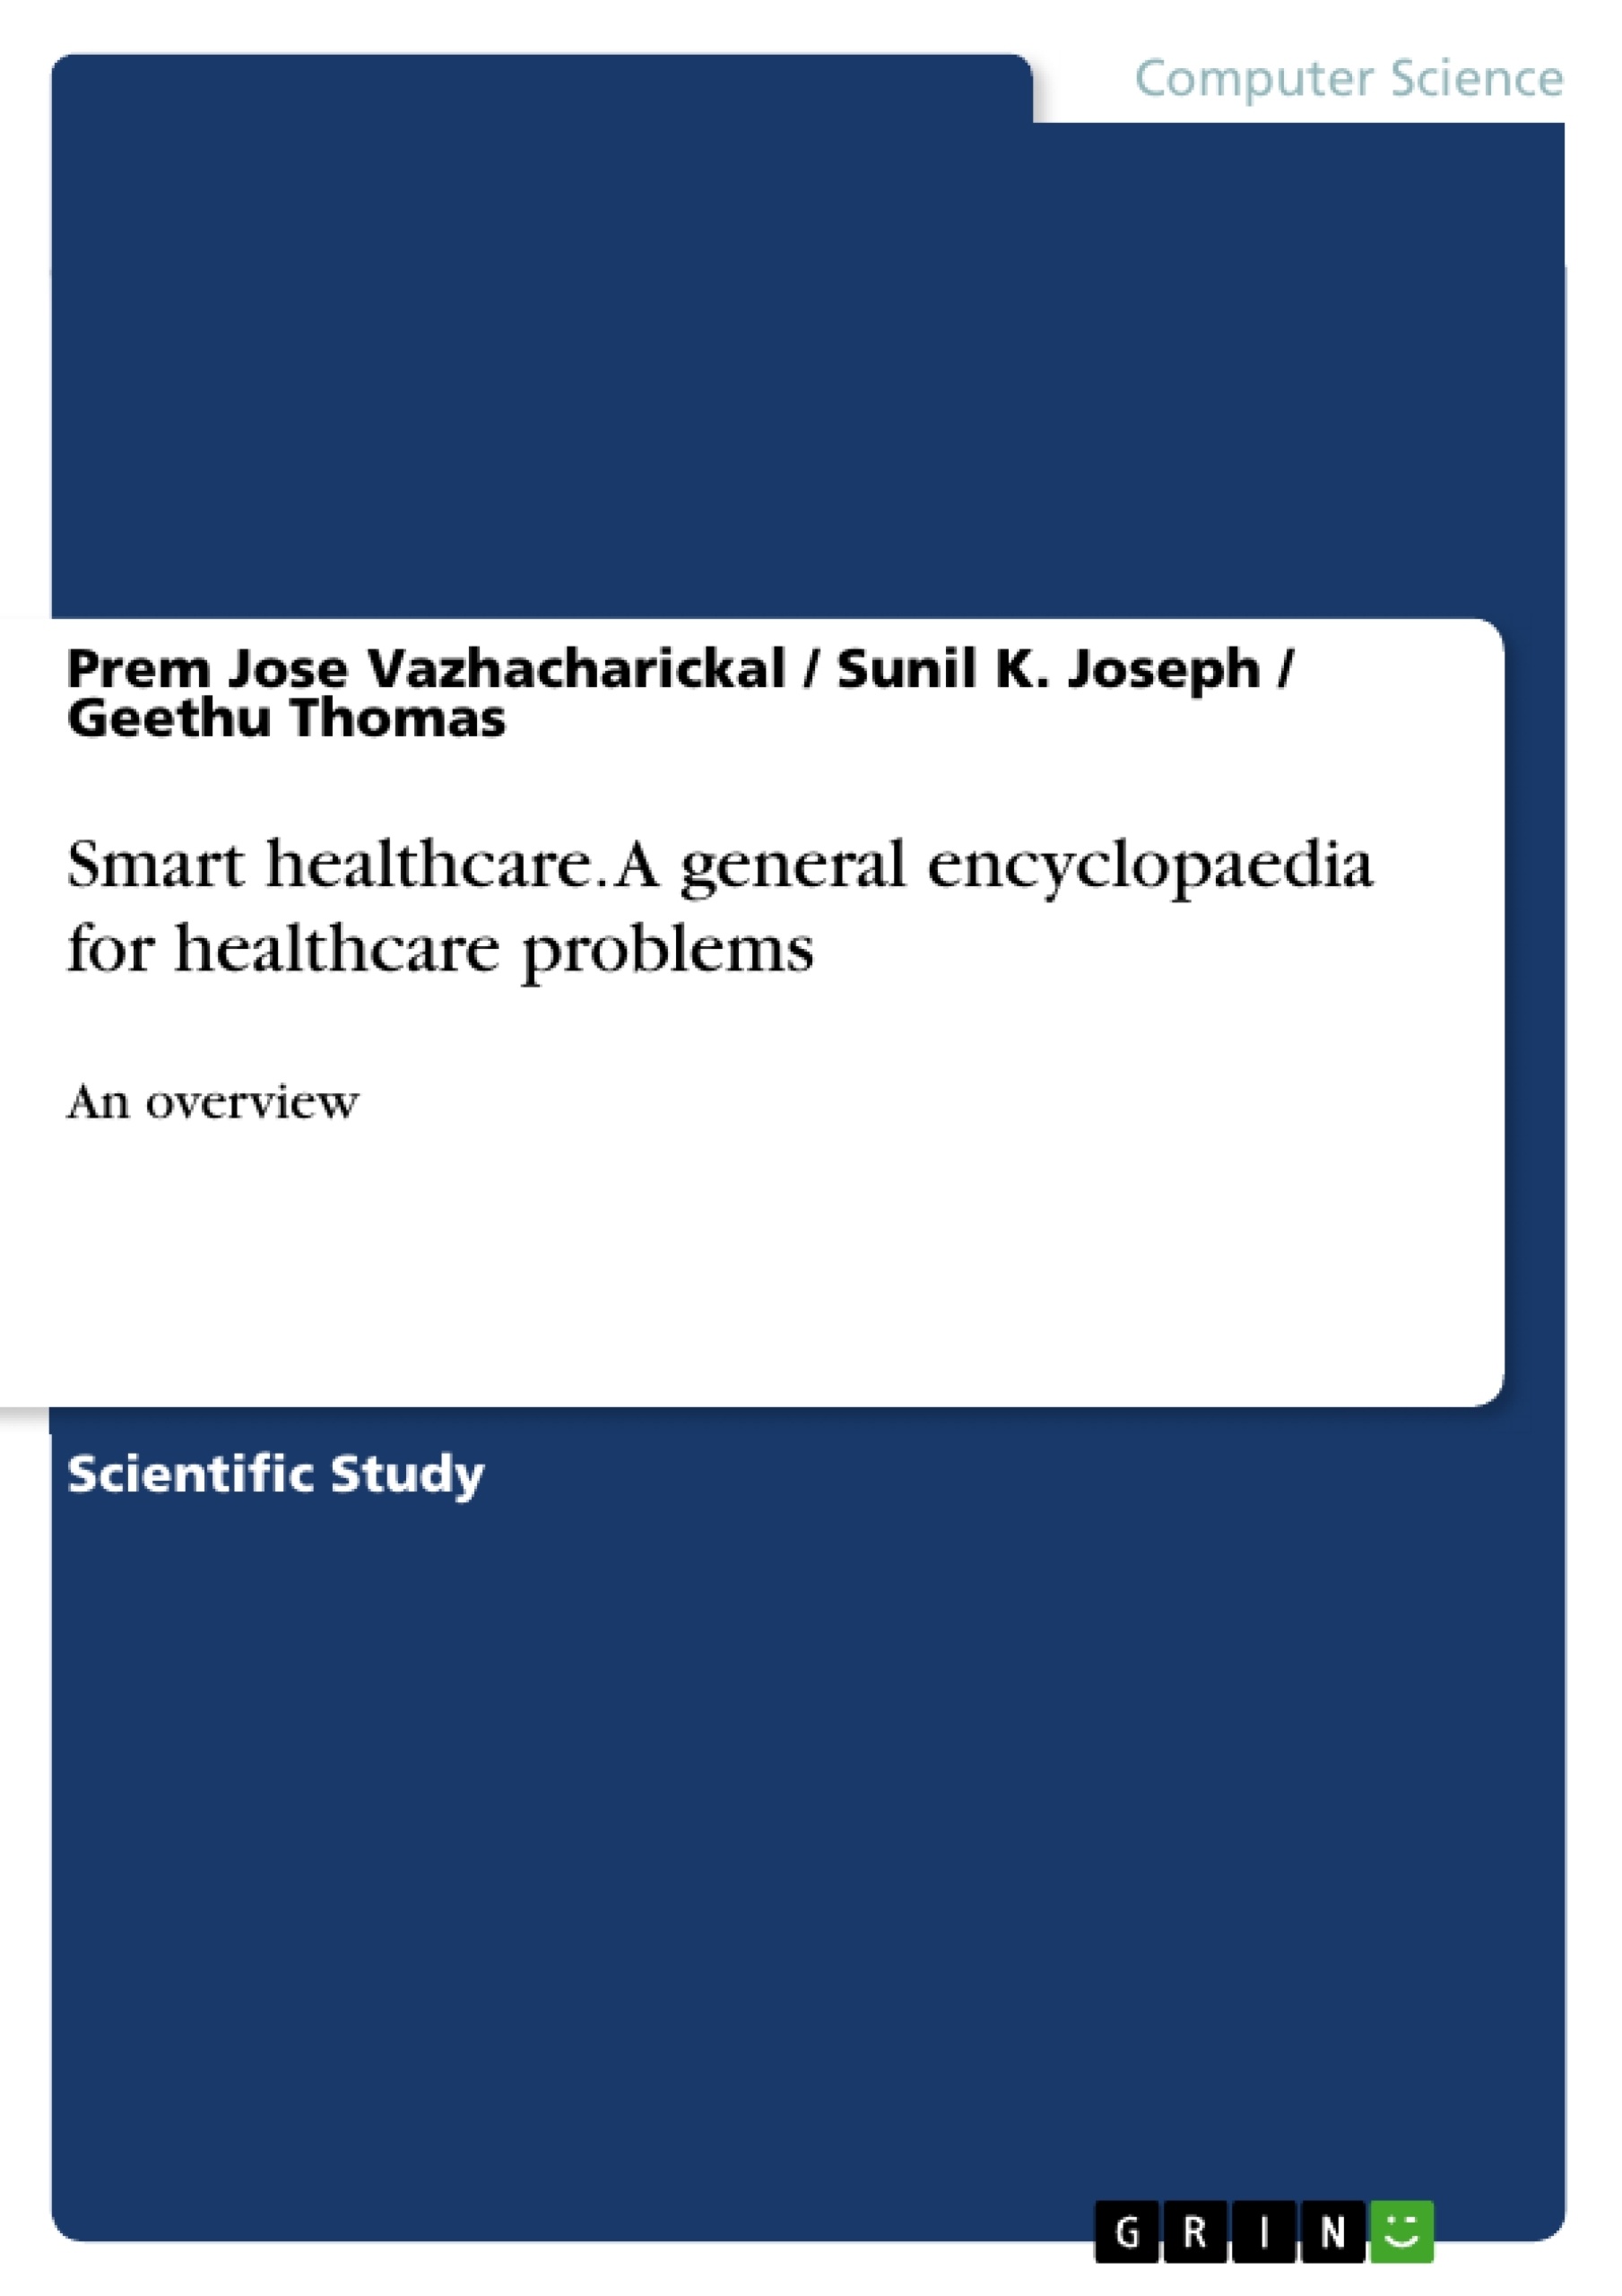 Title: Smart healthcare. A general encyclopaedia for healthcare problems